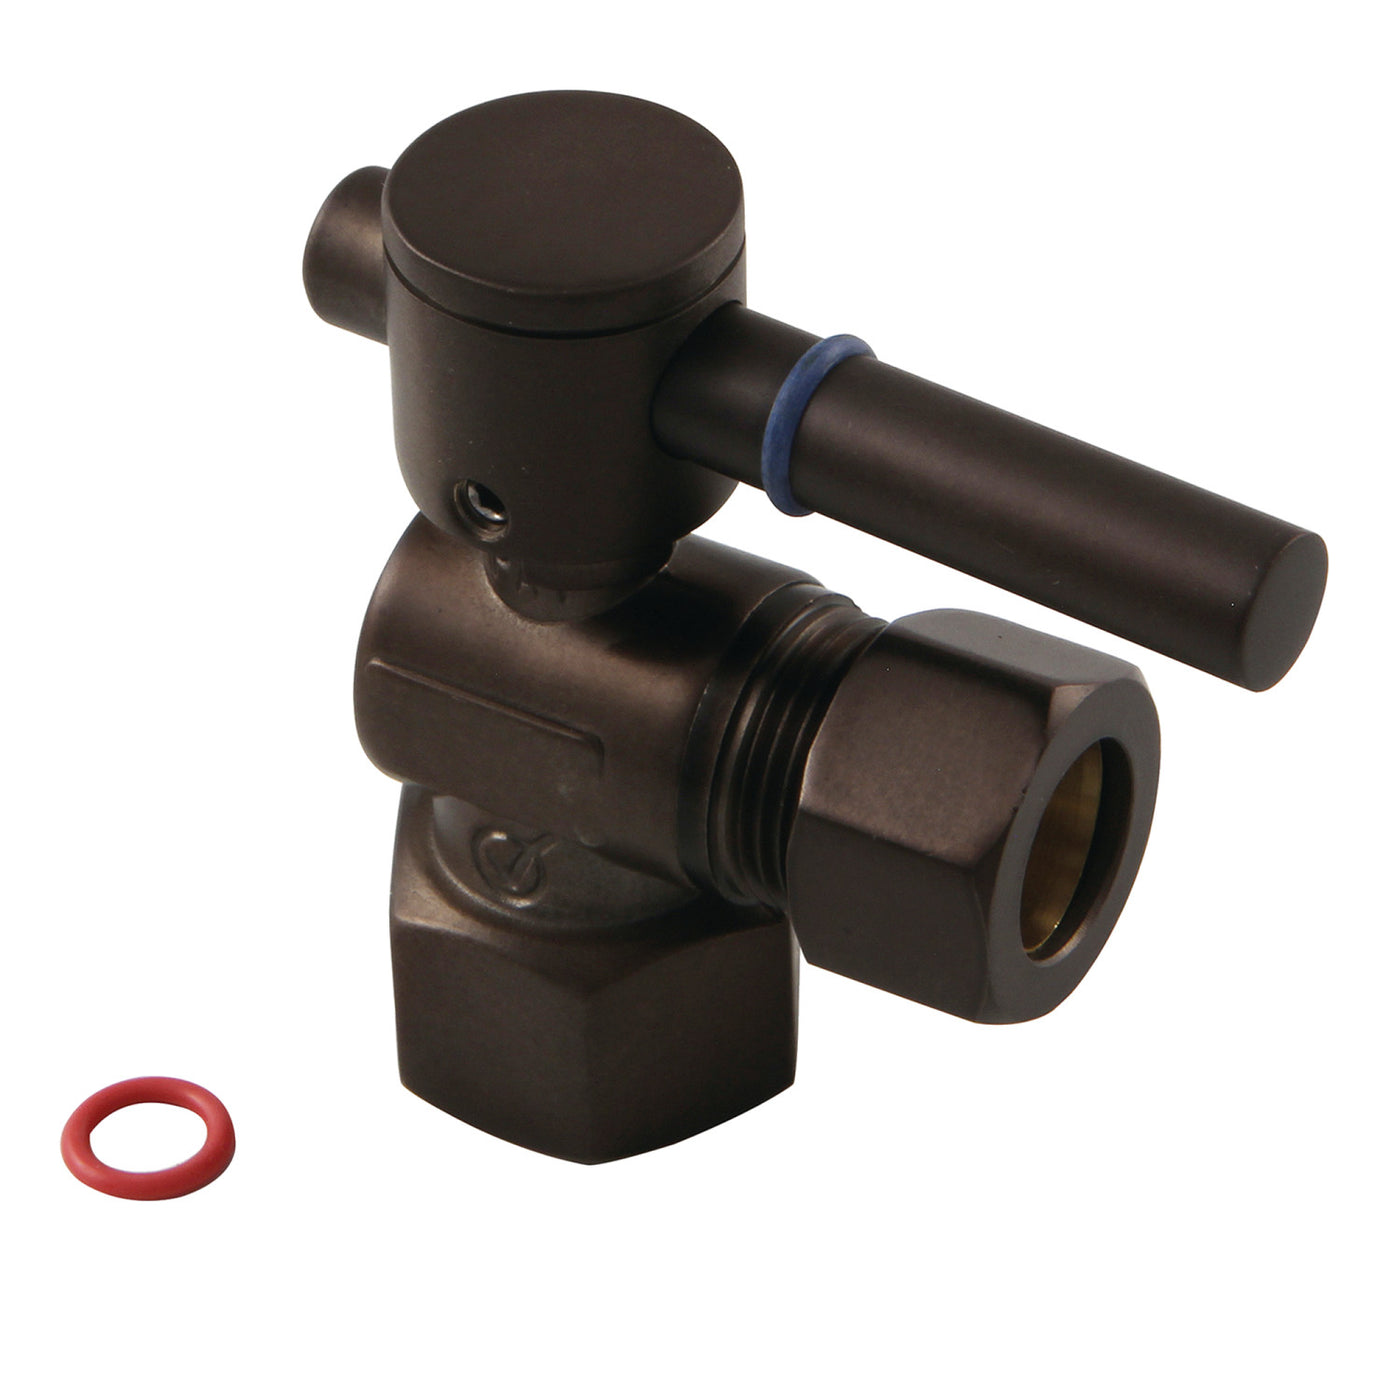 Elements of Design ECC44405DL 1/2-Inch FIP x 1/2-Inch OD Comp Angle Stop Valve, Oil Rubbed Bronze